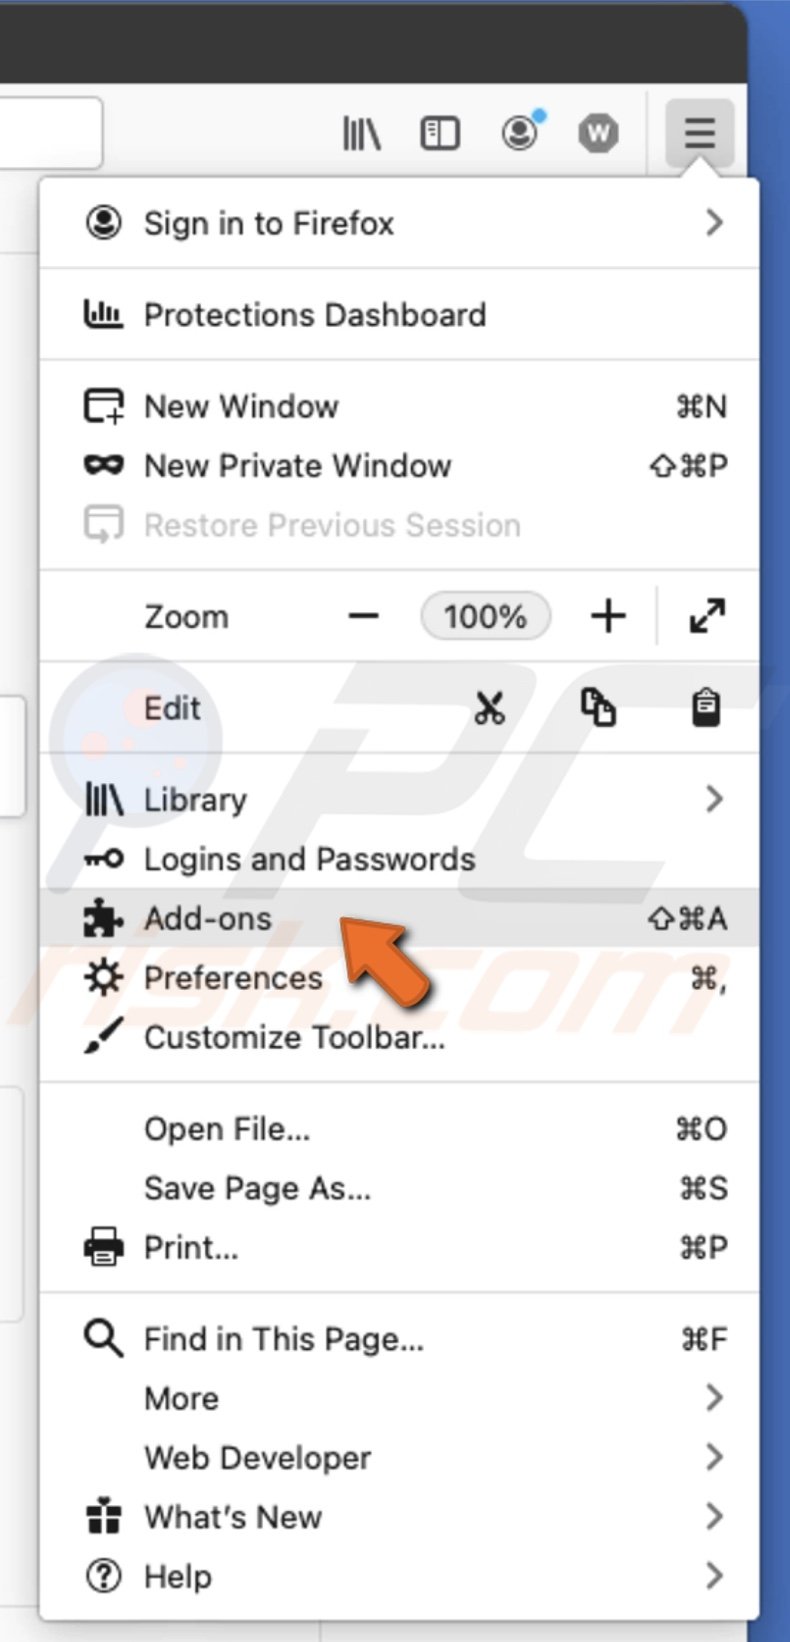 Go to Add-ons in Firefox